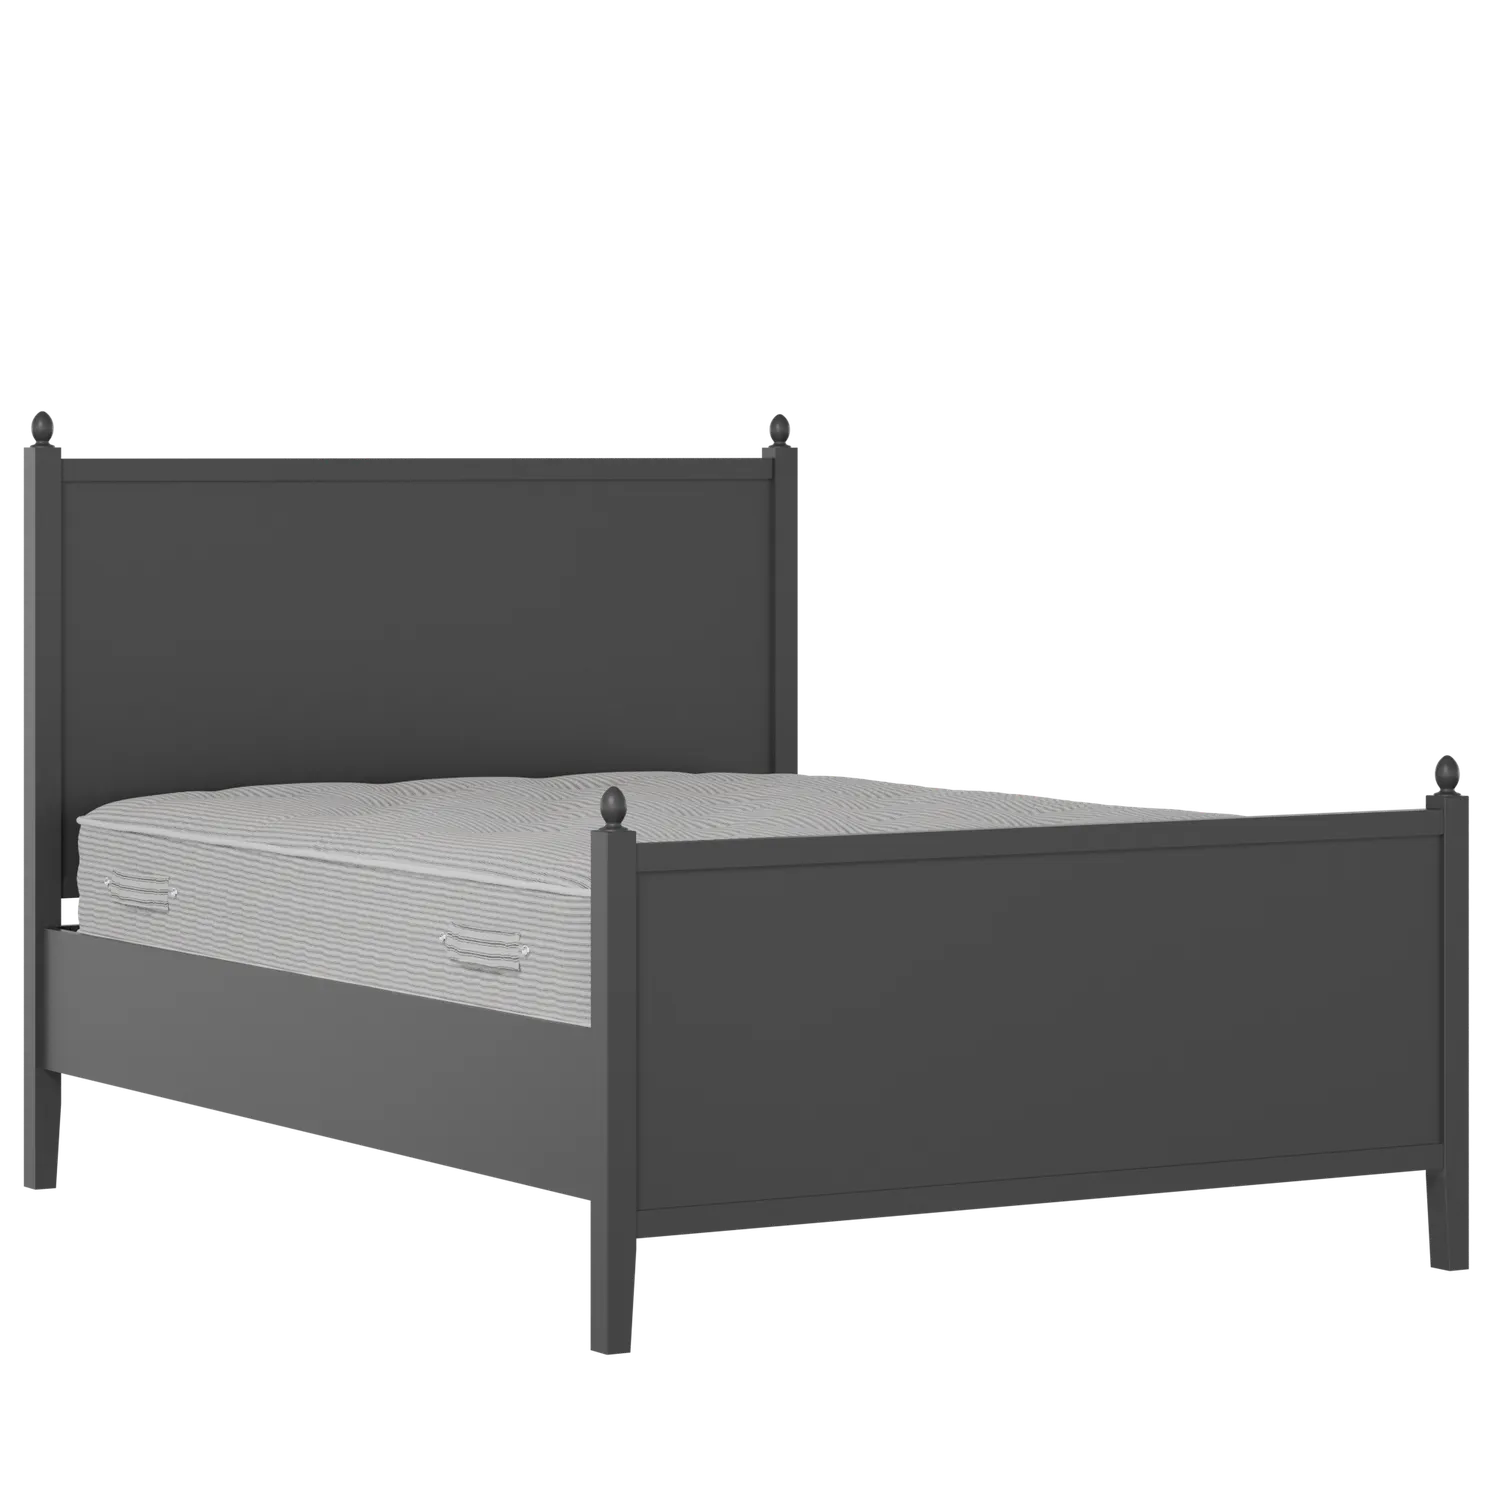 Marbella Painted painted wood bed in black with Juno mattress